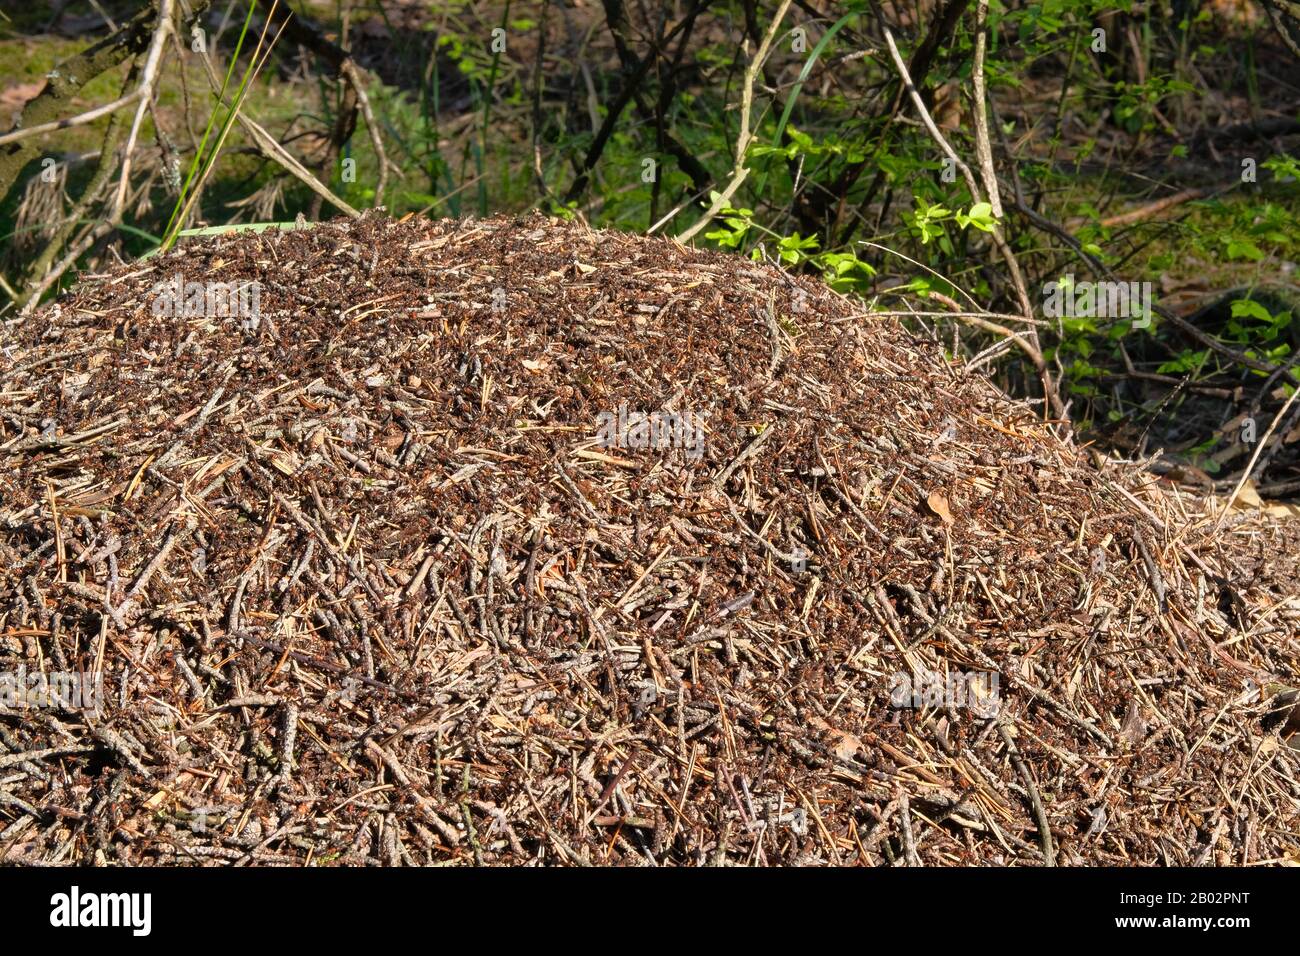 Forest anthill view. Anthill with colony of ants in forest wilderness scene. Nature Wildlife, close-up. Stock Photo